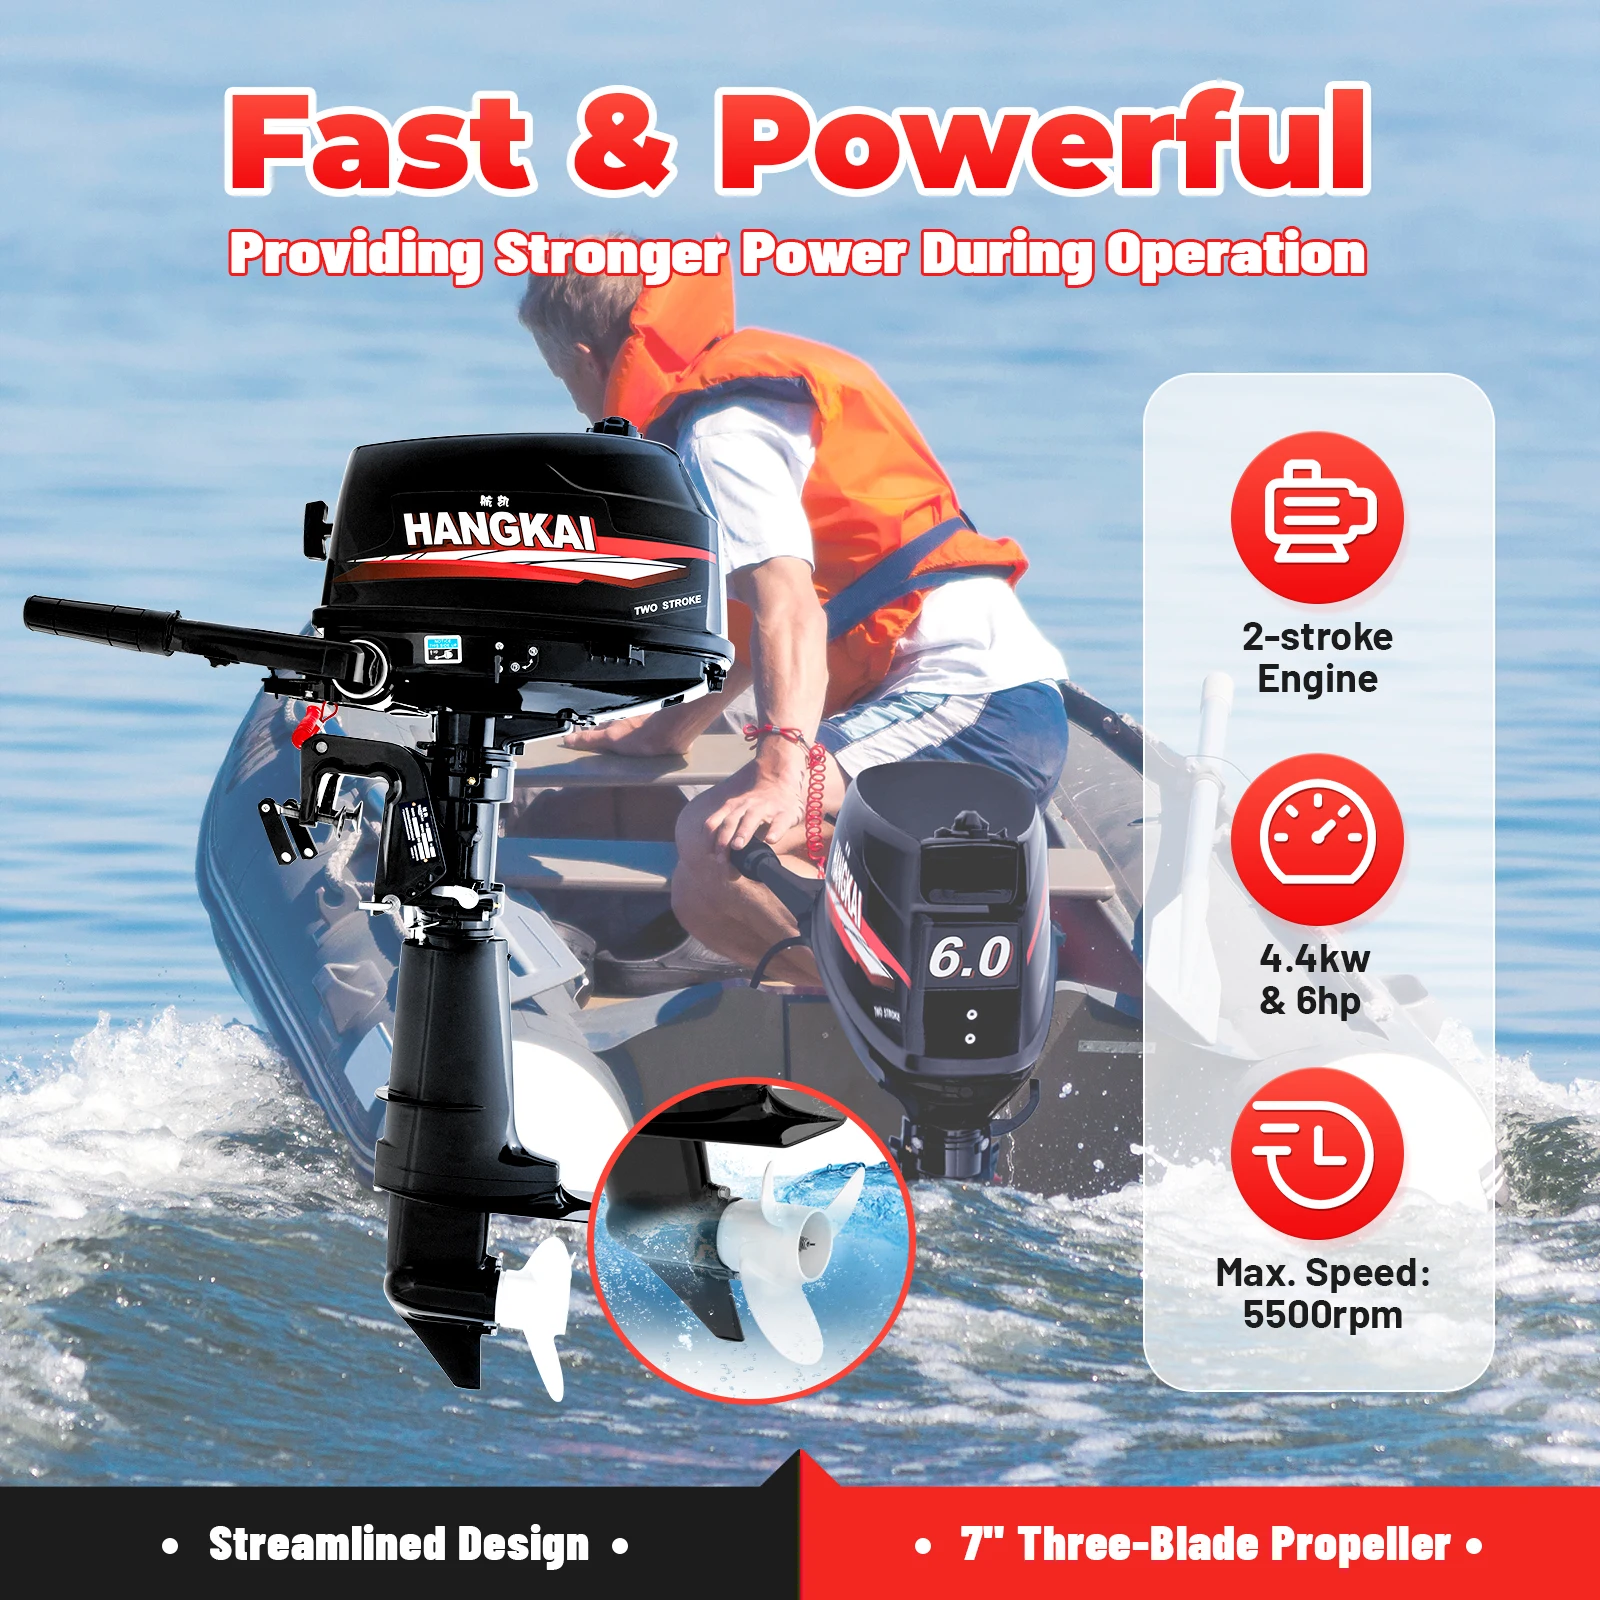 Hangkai 6HP Boat Outboard Motor Short Shaft, 2 Stroke Outboard Motor Fishing Boat Engine CDI Ignition ,Water Cooling System US 3 6ps 2 stroke outboard motor gasoline engine water cooling system outboard fishing boat engine